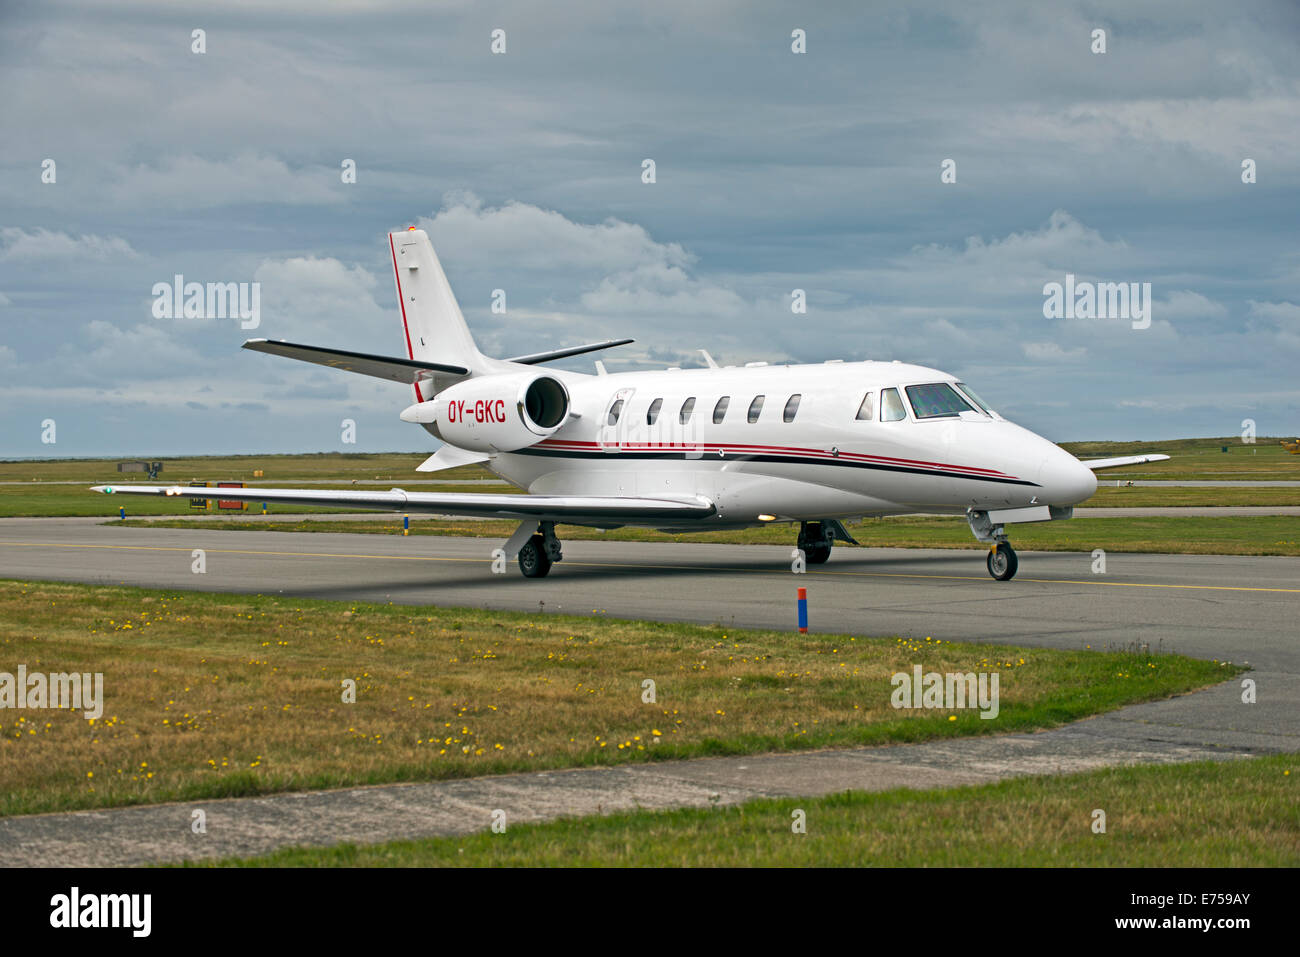 Lego Cessna 550 Citazione II OY-GKC Raf Valley Anglesey N Wales UK battenti. Foto Stock